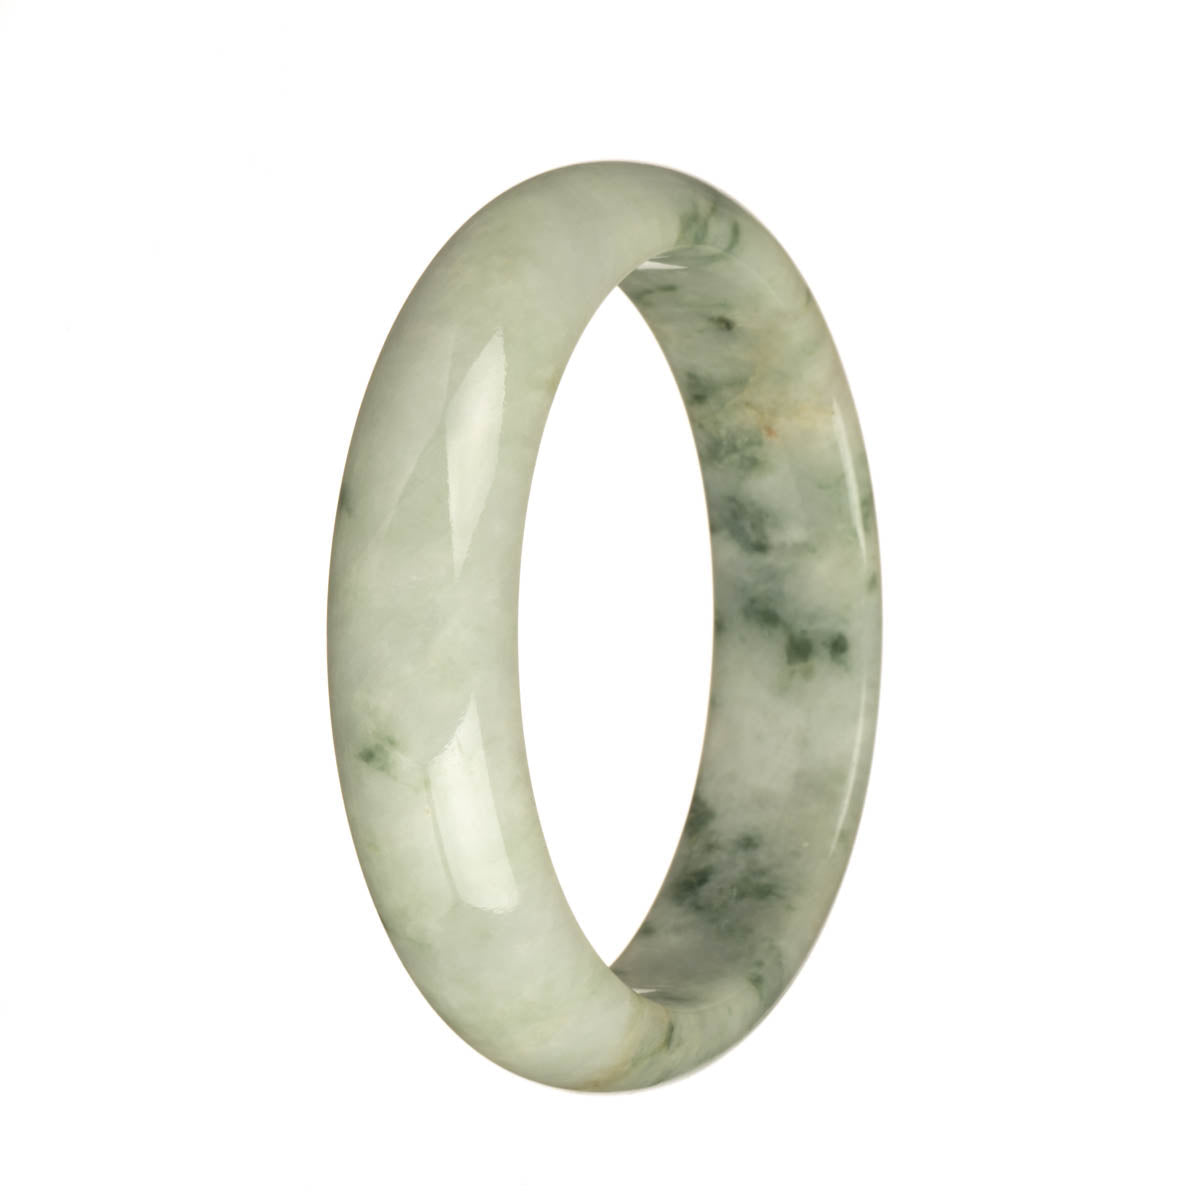 A close-up image of a traditional jade bracelet with a half moon shape. The bracelet features authentic Grade A white jade with intricate green patterns and red spots.